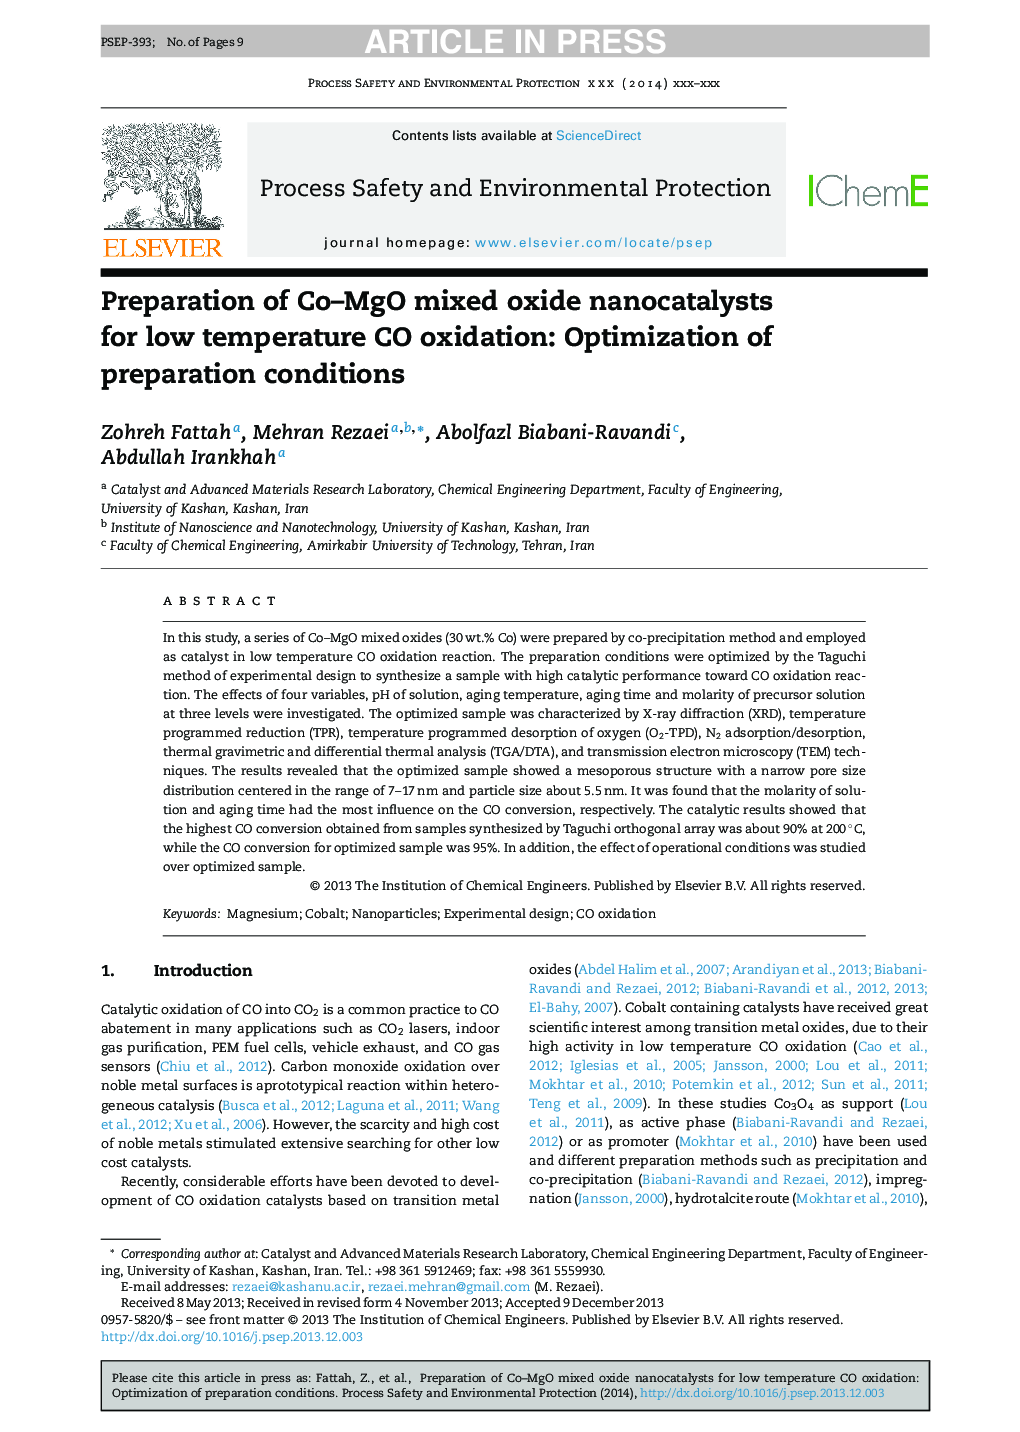 Preparation of Co-MgO mixed oxide nanocatalysts for low temperature CO oxidation: Optimization of preparation conditions